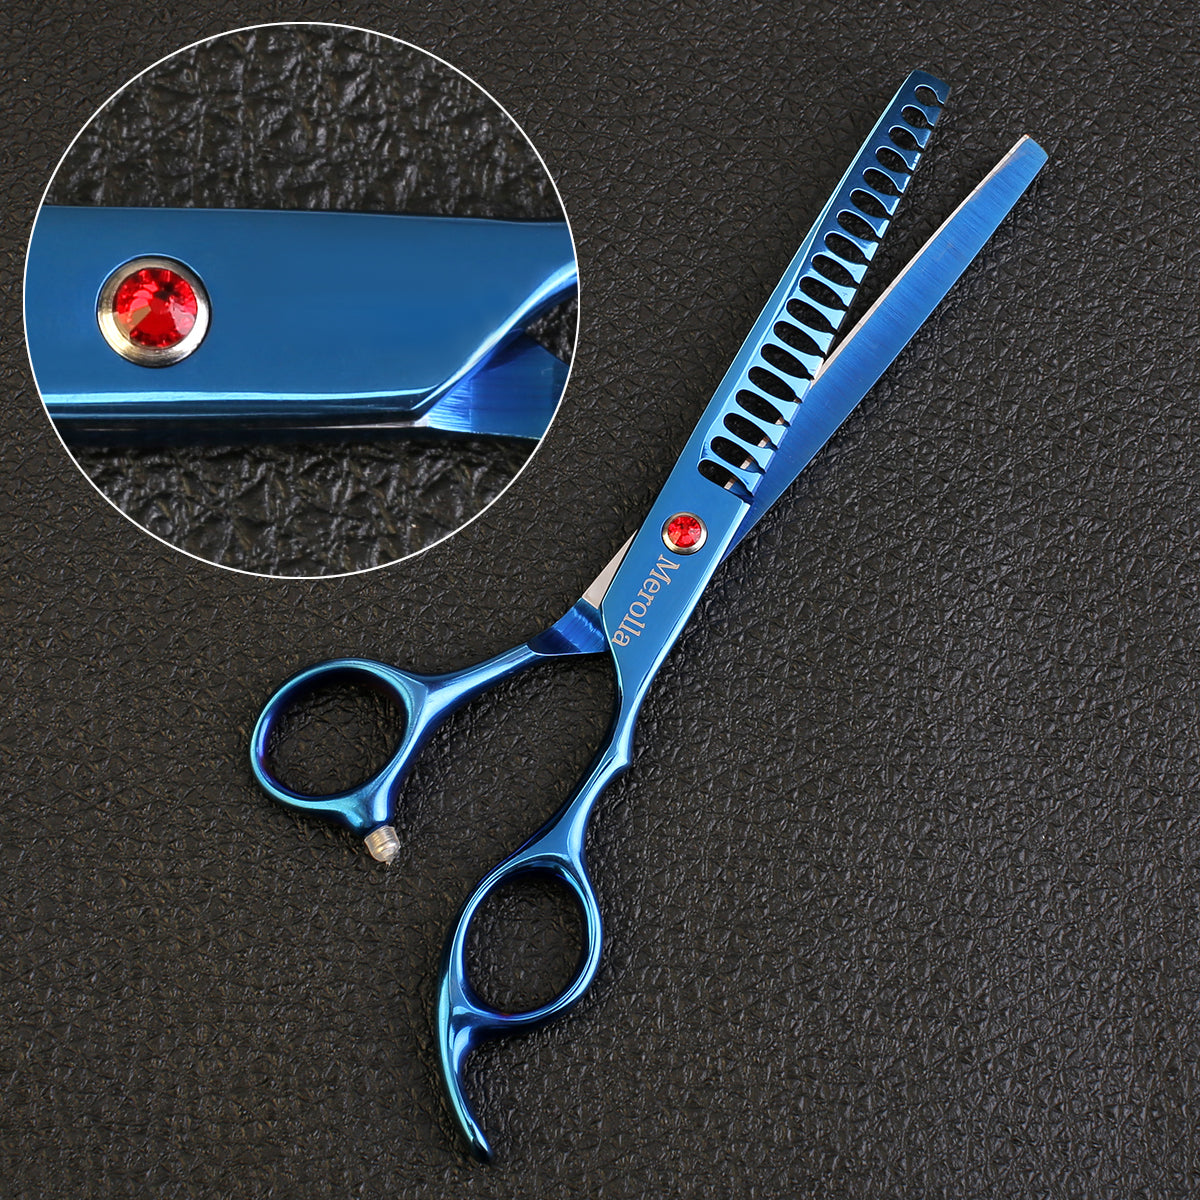 DC012 Best Dog Grooming Chunker Scissors With Customize Name